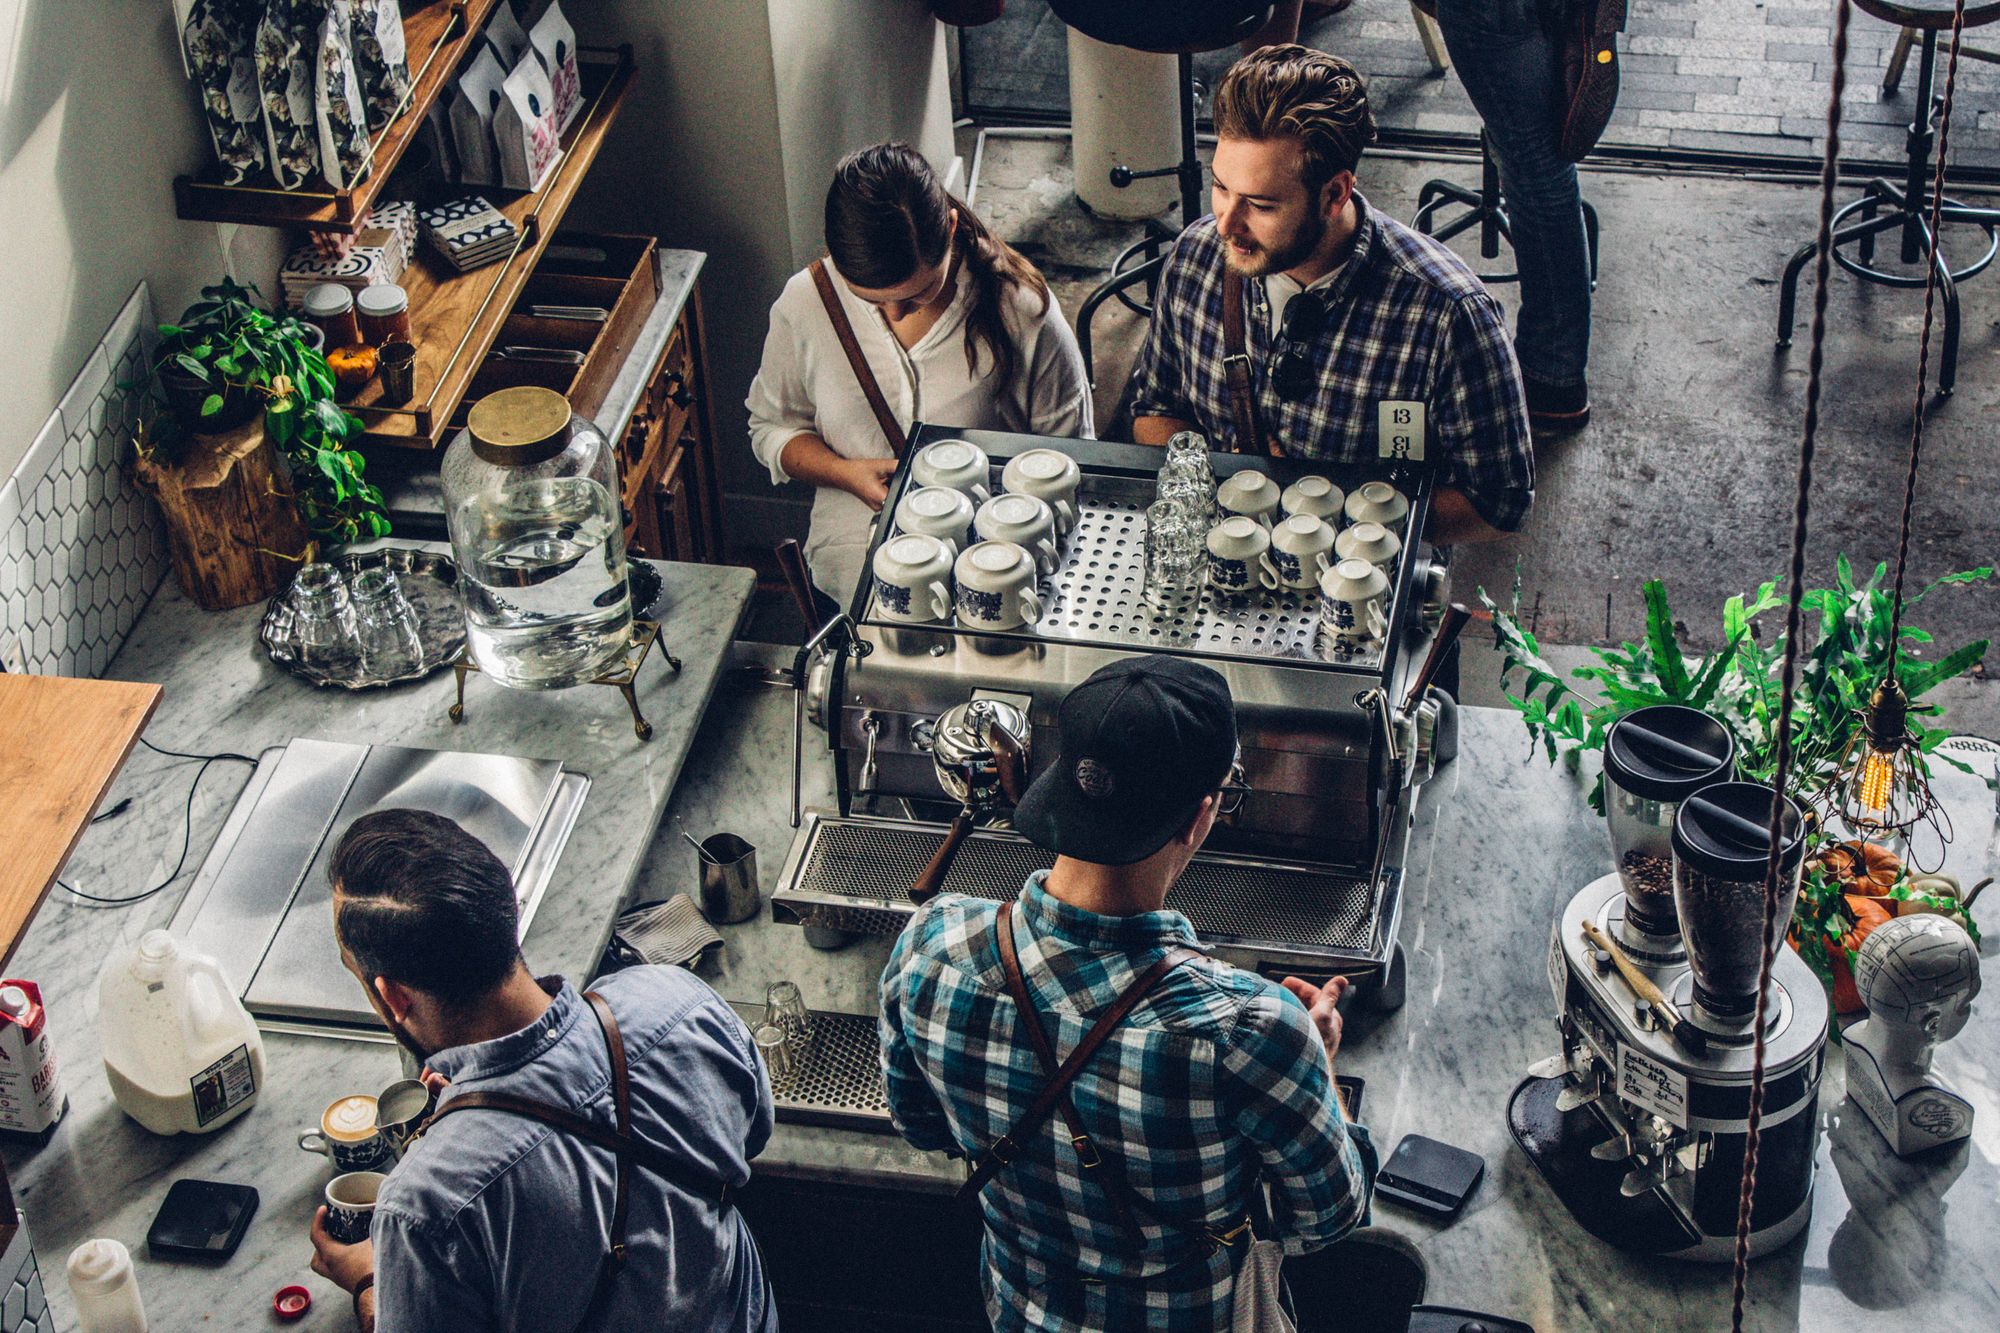 Top view of pair of customers and baristas in a coffee shop